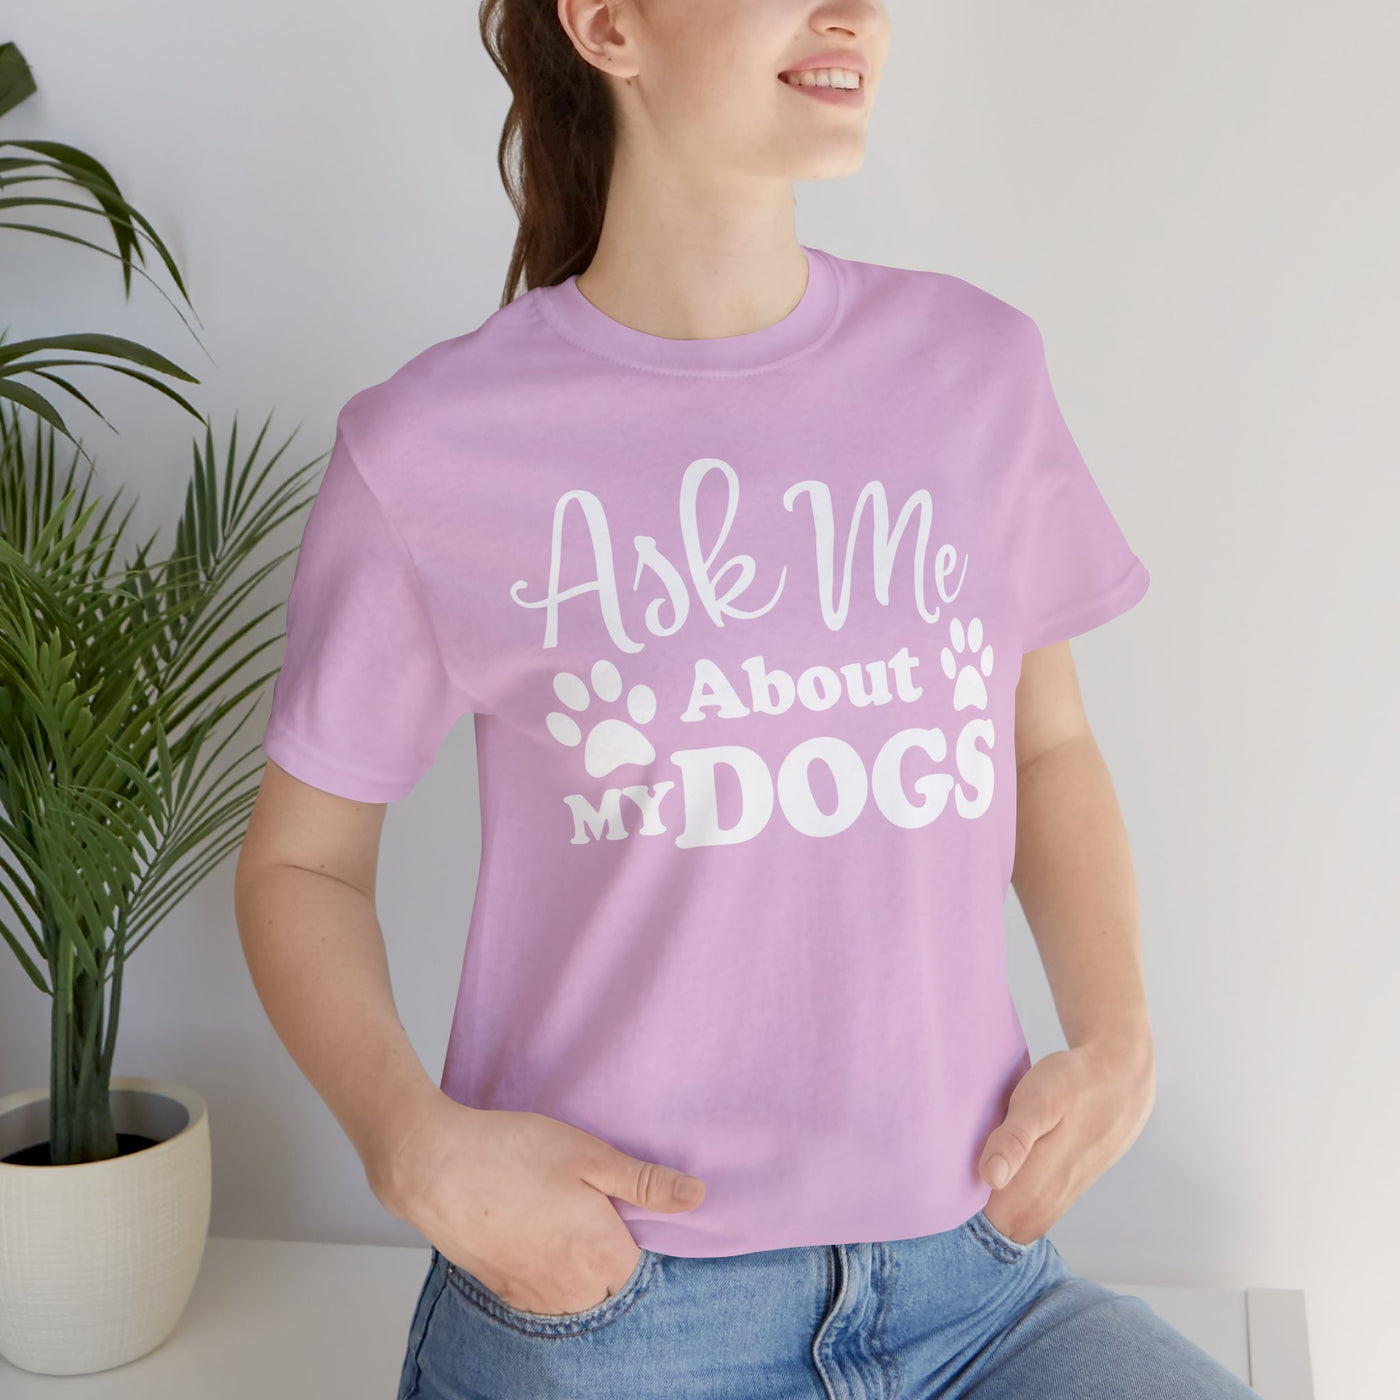 Ask Me About My Dogs T-Shirt